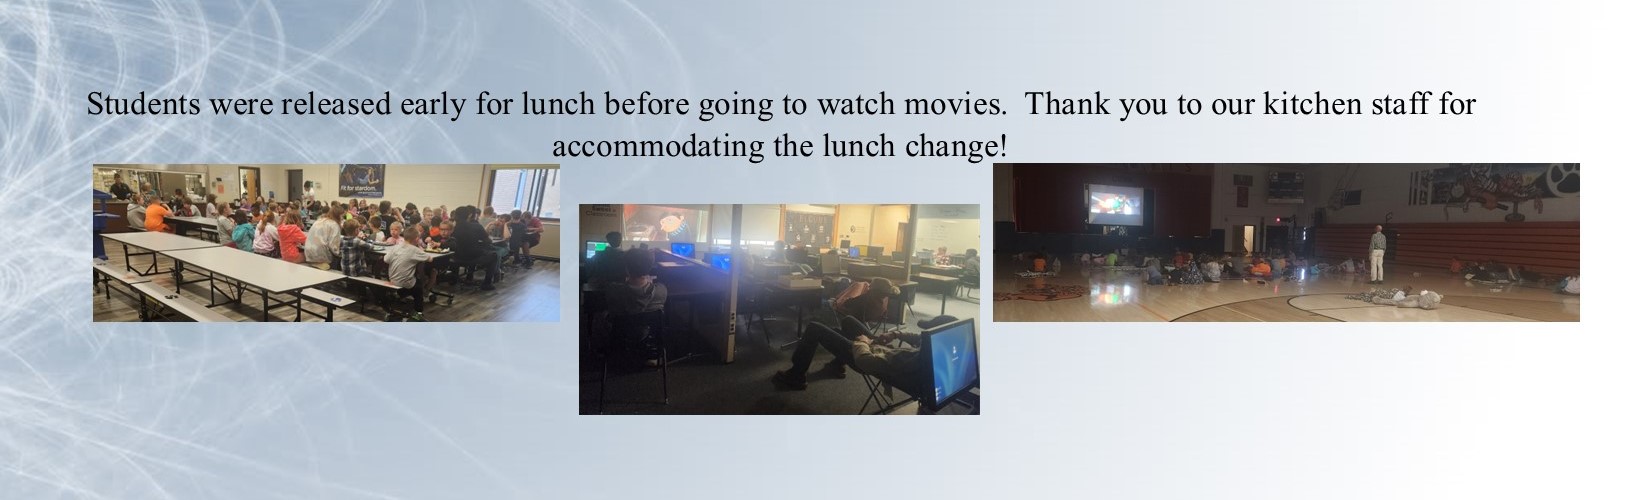 Images of students at lunch and watching movies